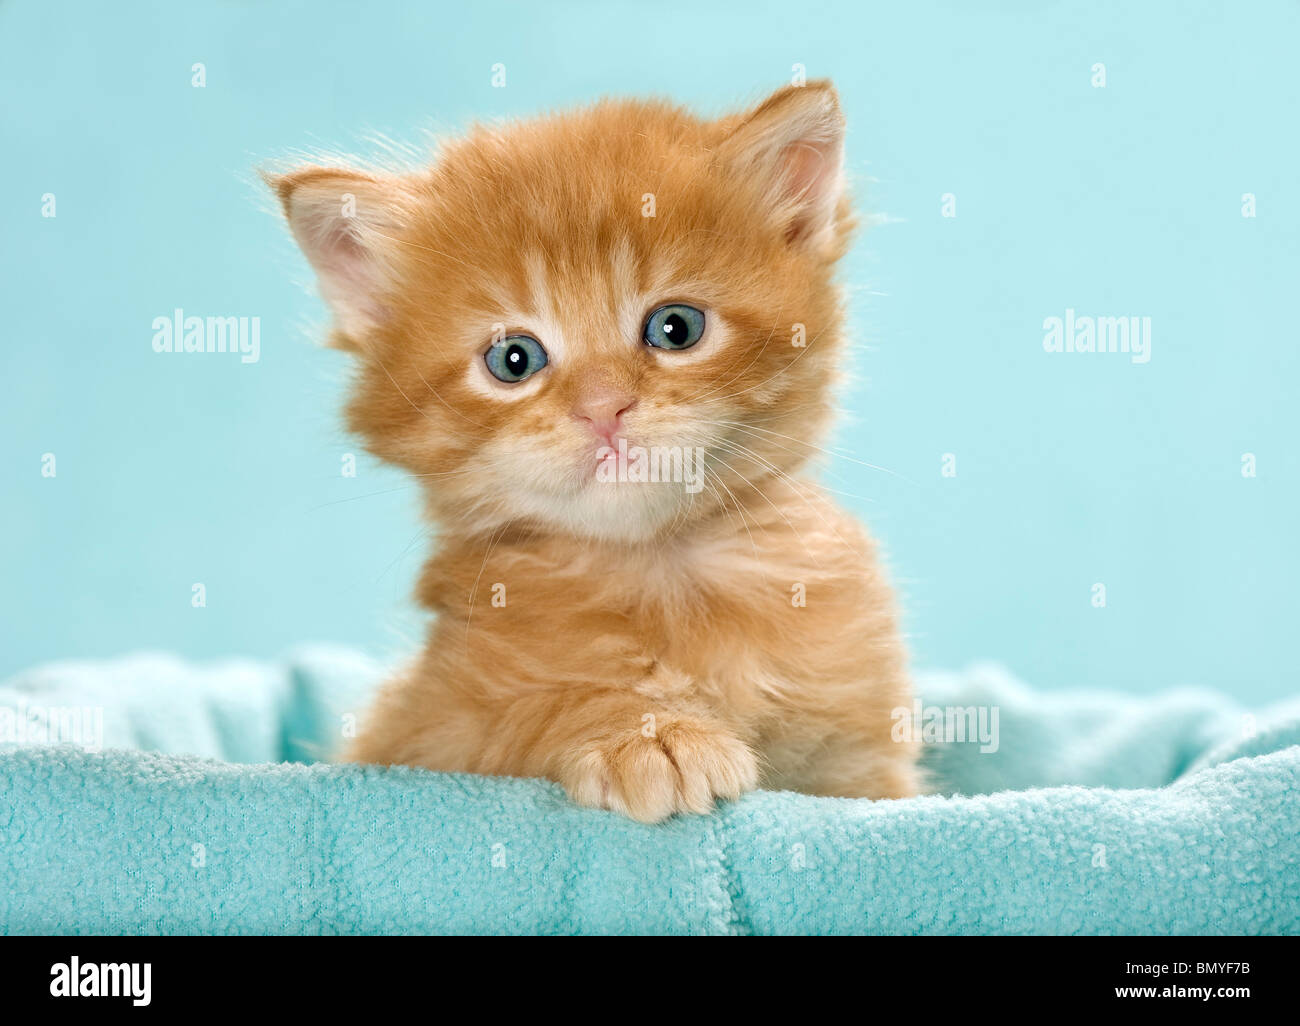 Maine Coon cat (red tabby) kitten portrait Stock Photo